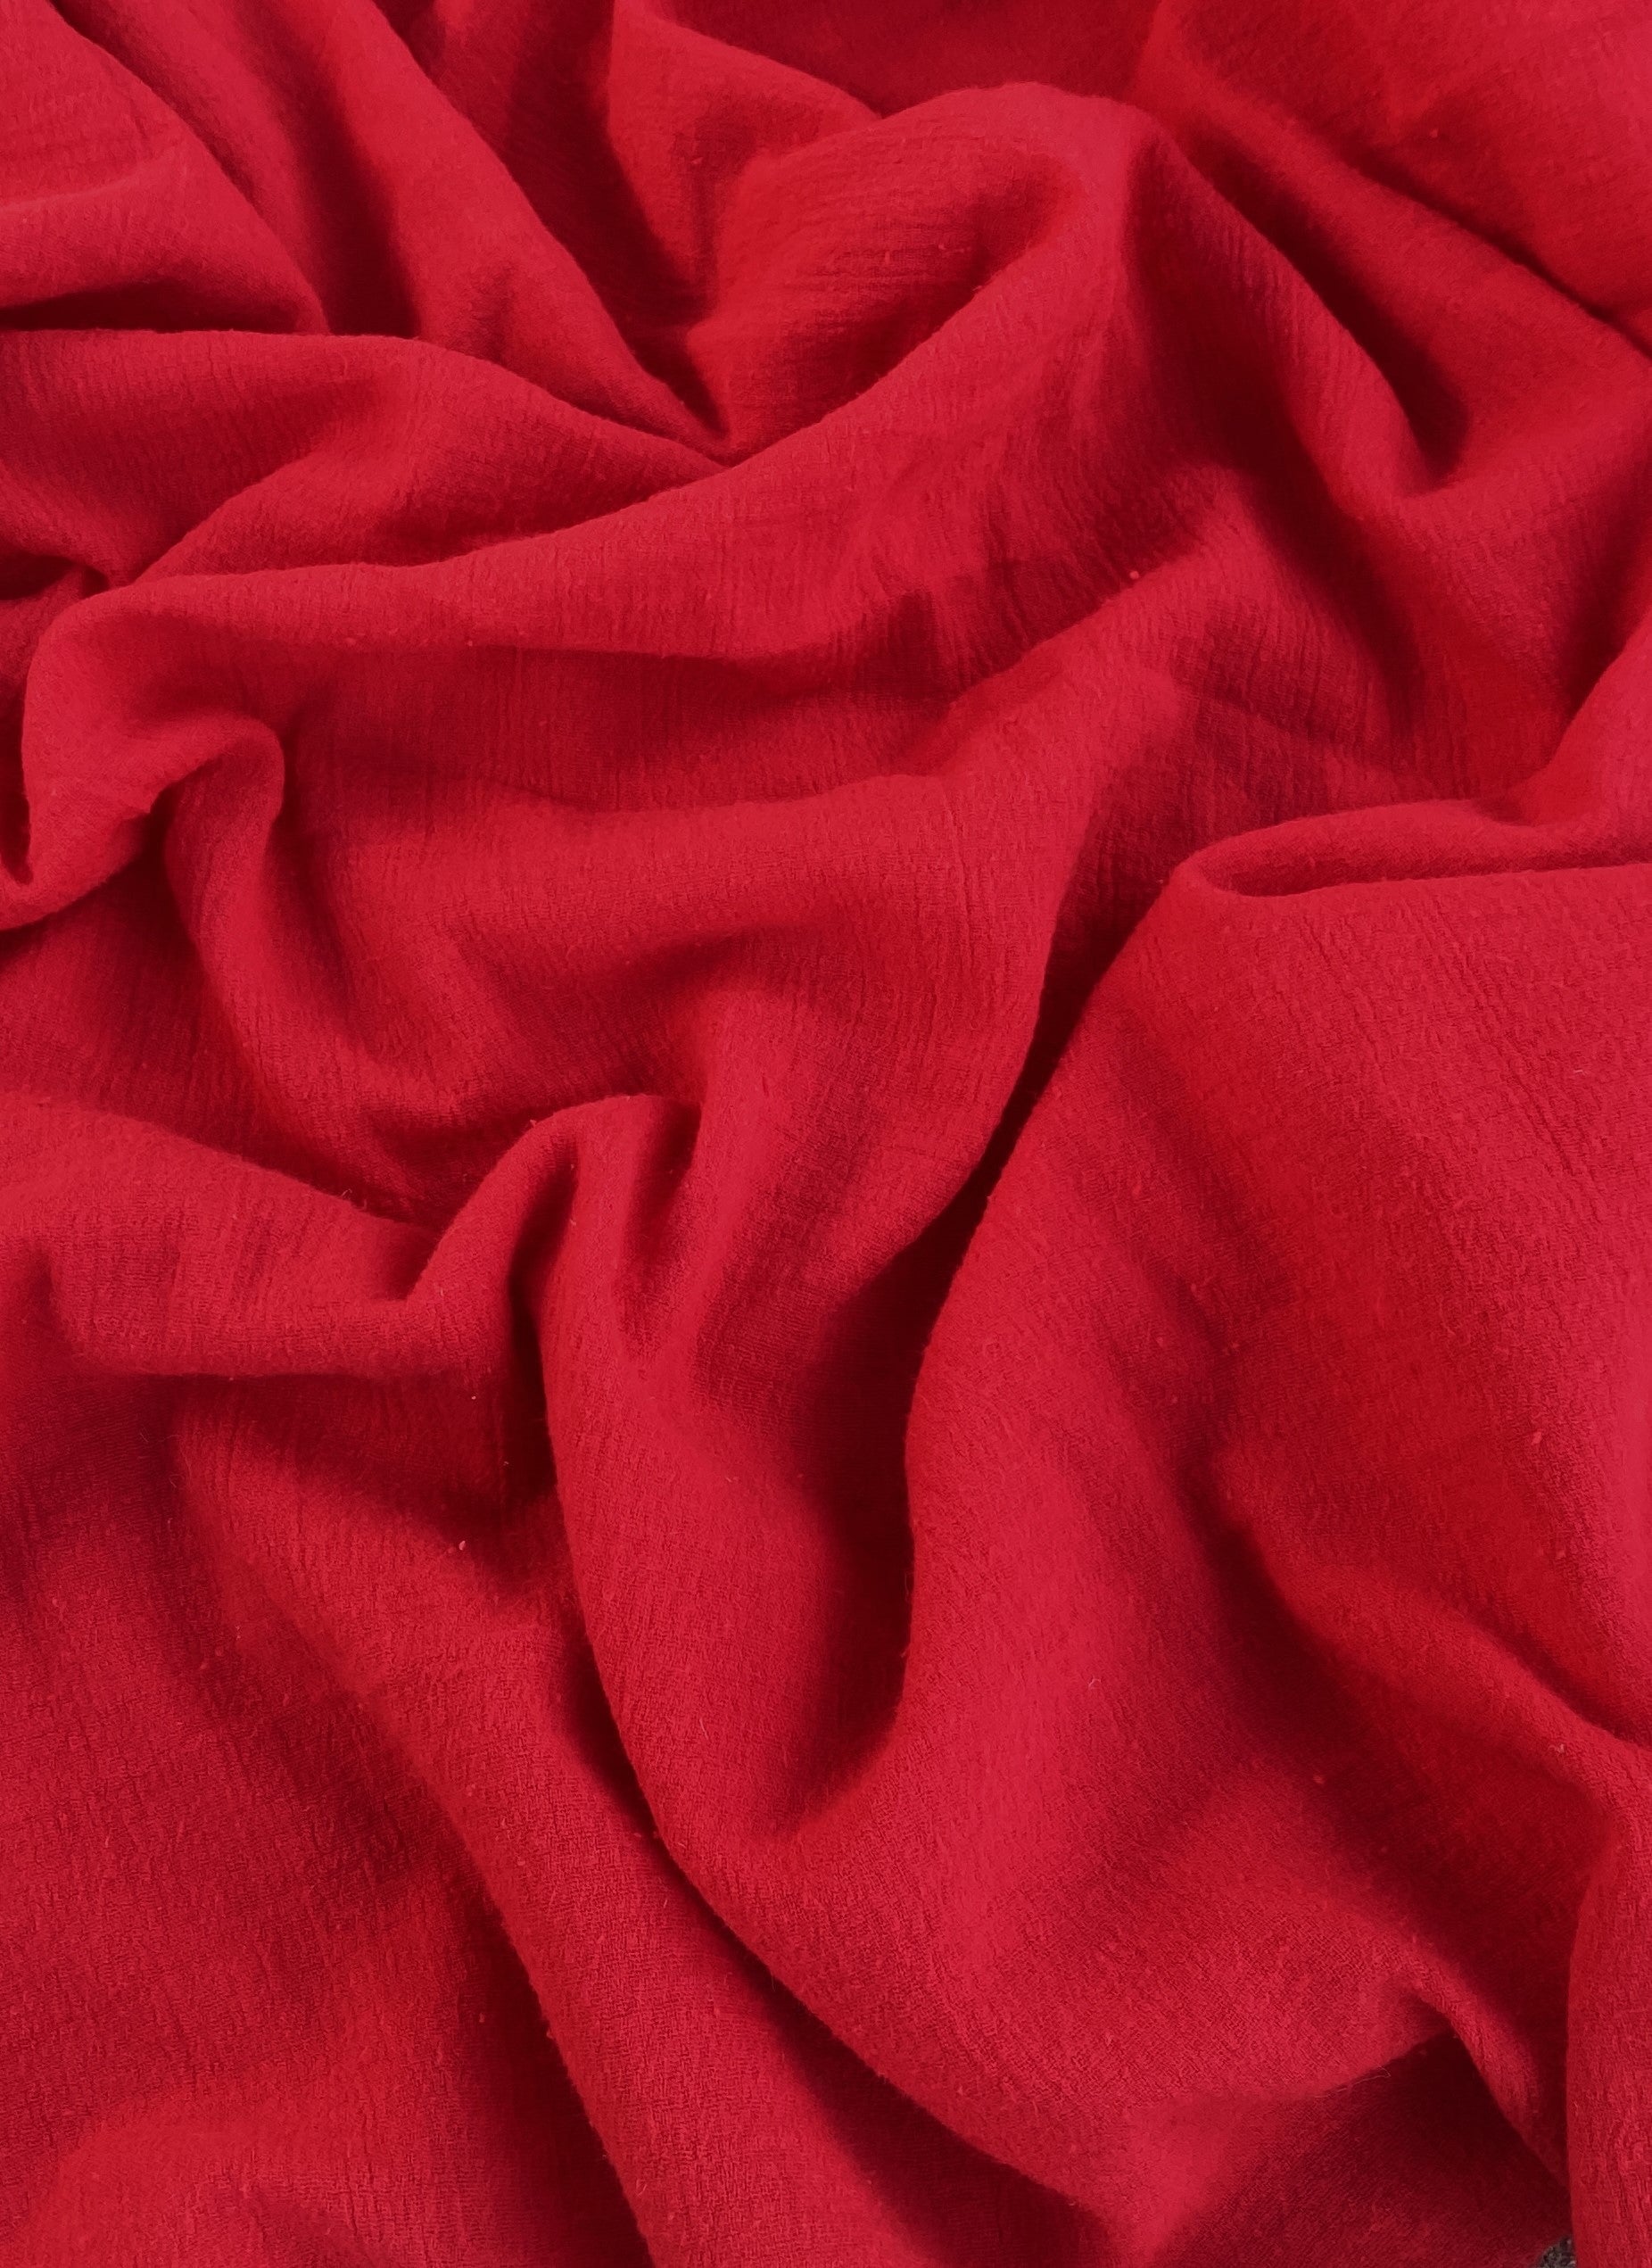 red gauze fabric, red cotton gauze fabric, red cotton fabric, red crinkle gauze. red textured gauze fabric, fabric for swaddles fabric for baby, baby fabric red, red natural fabric